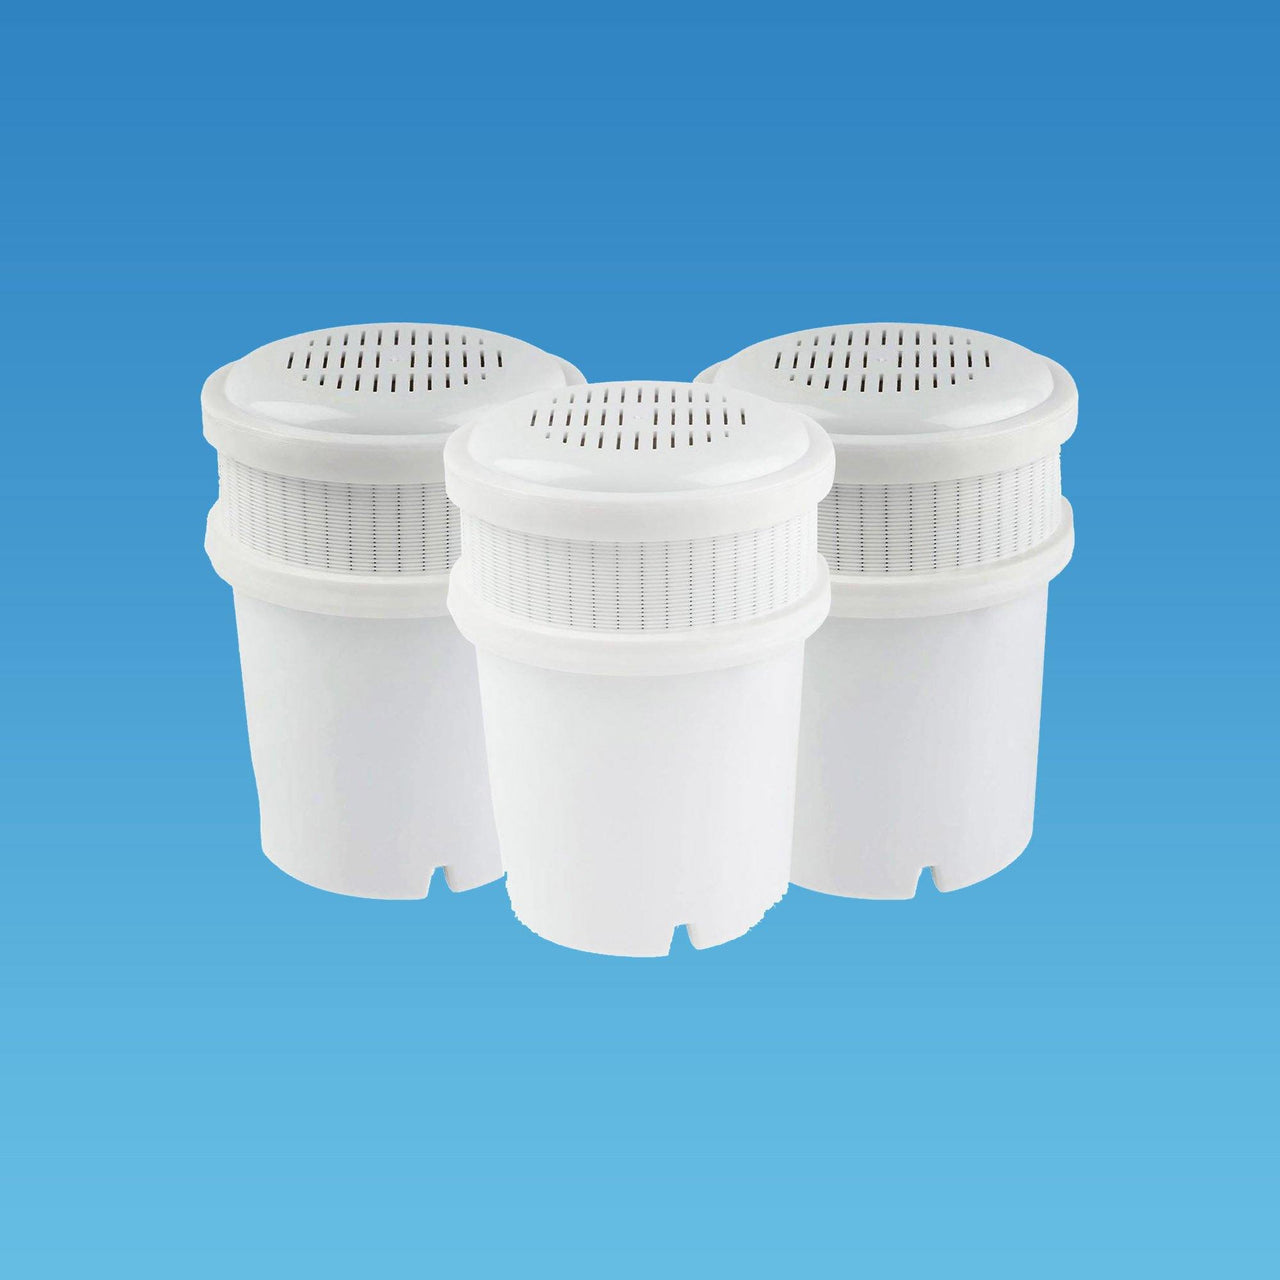 AquaBliss Water Filter Pitcher Cartridges (FWPC) - 3 pack